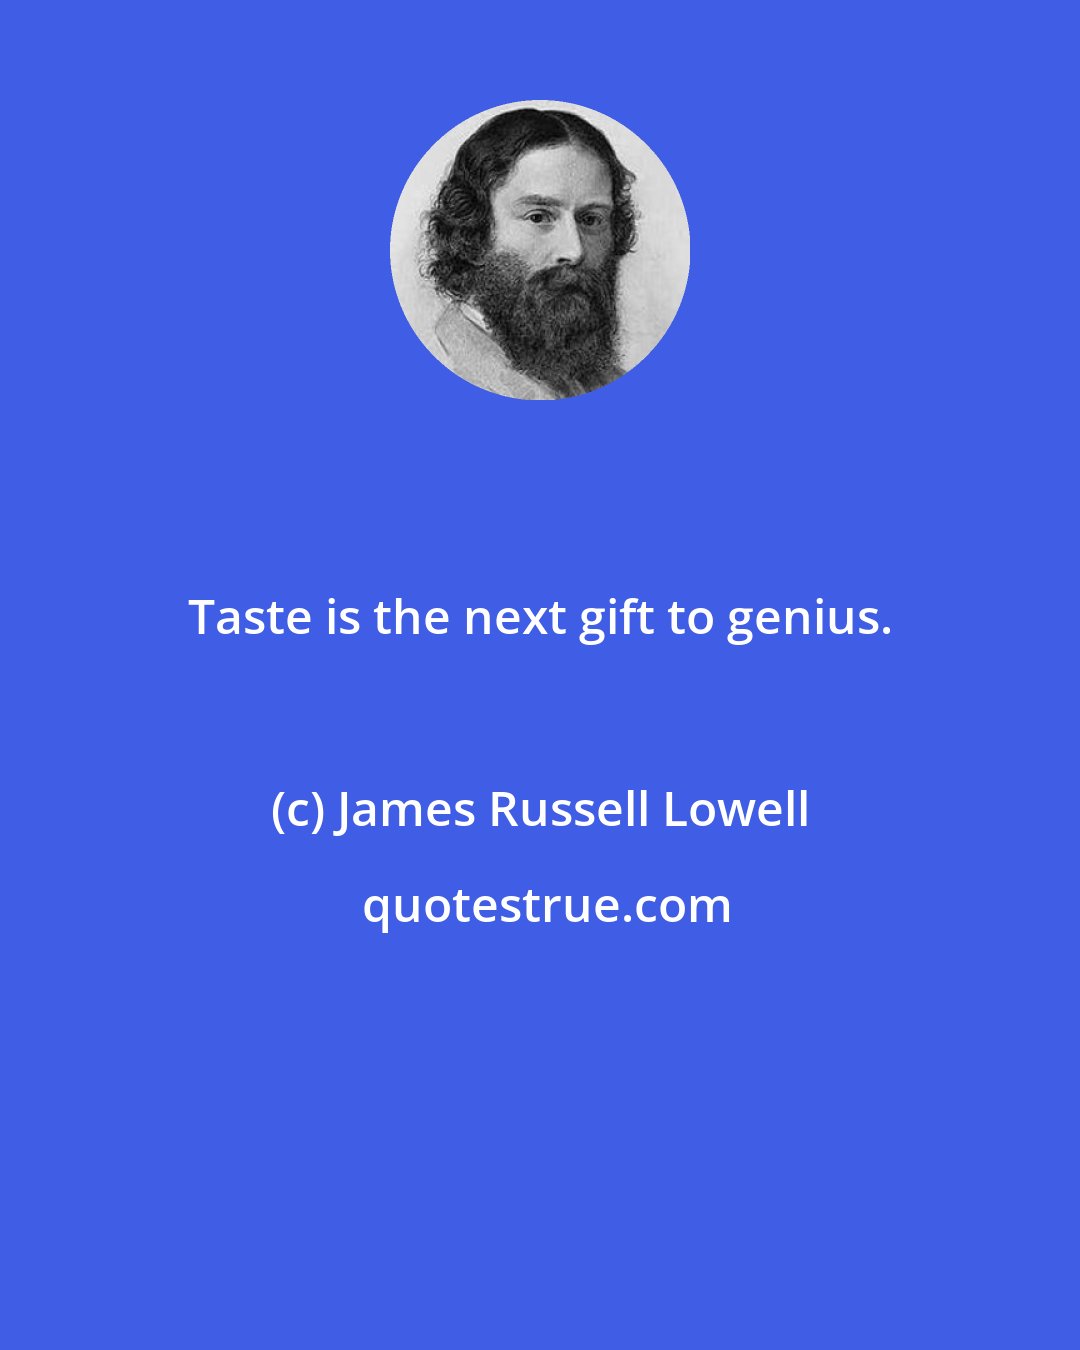 James Russell Lowell: Taste is the next gift to genius.